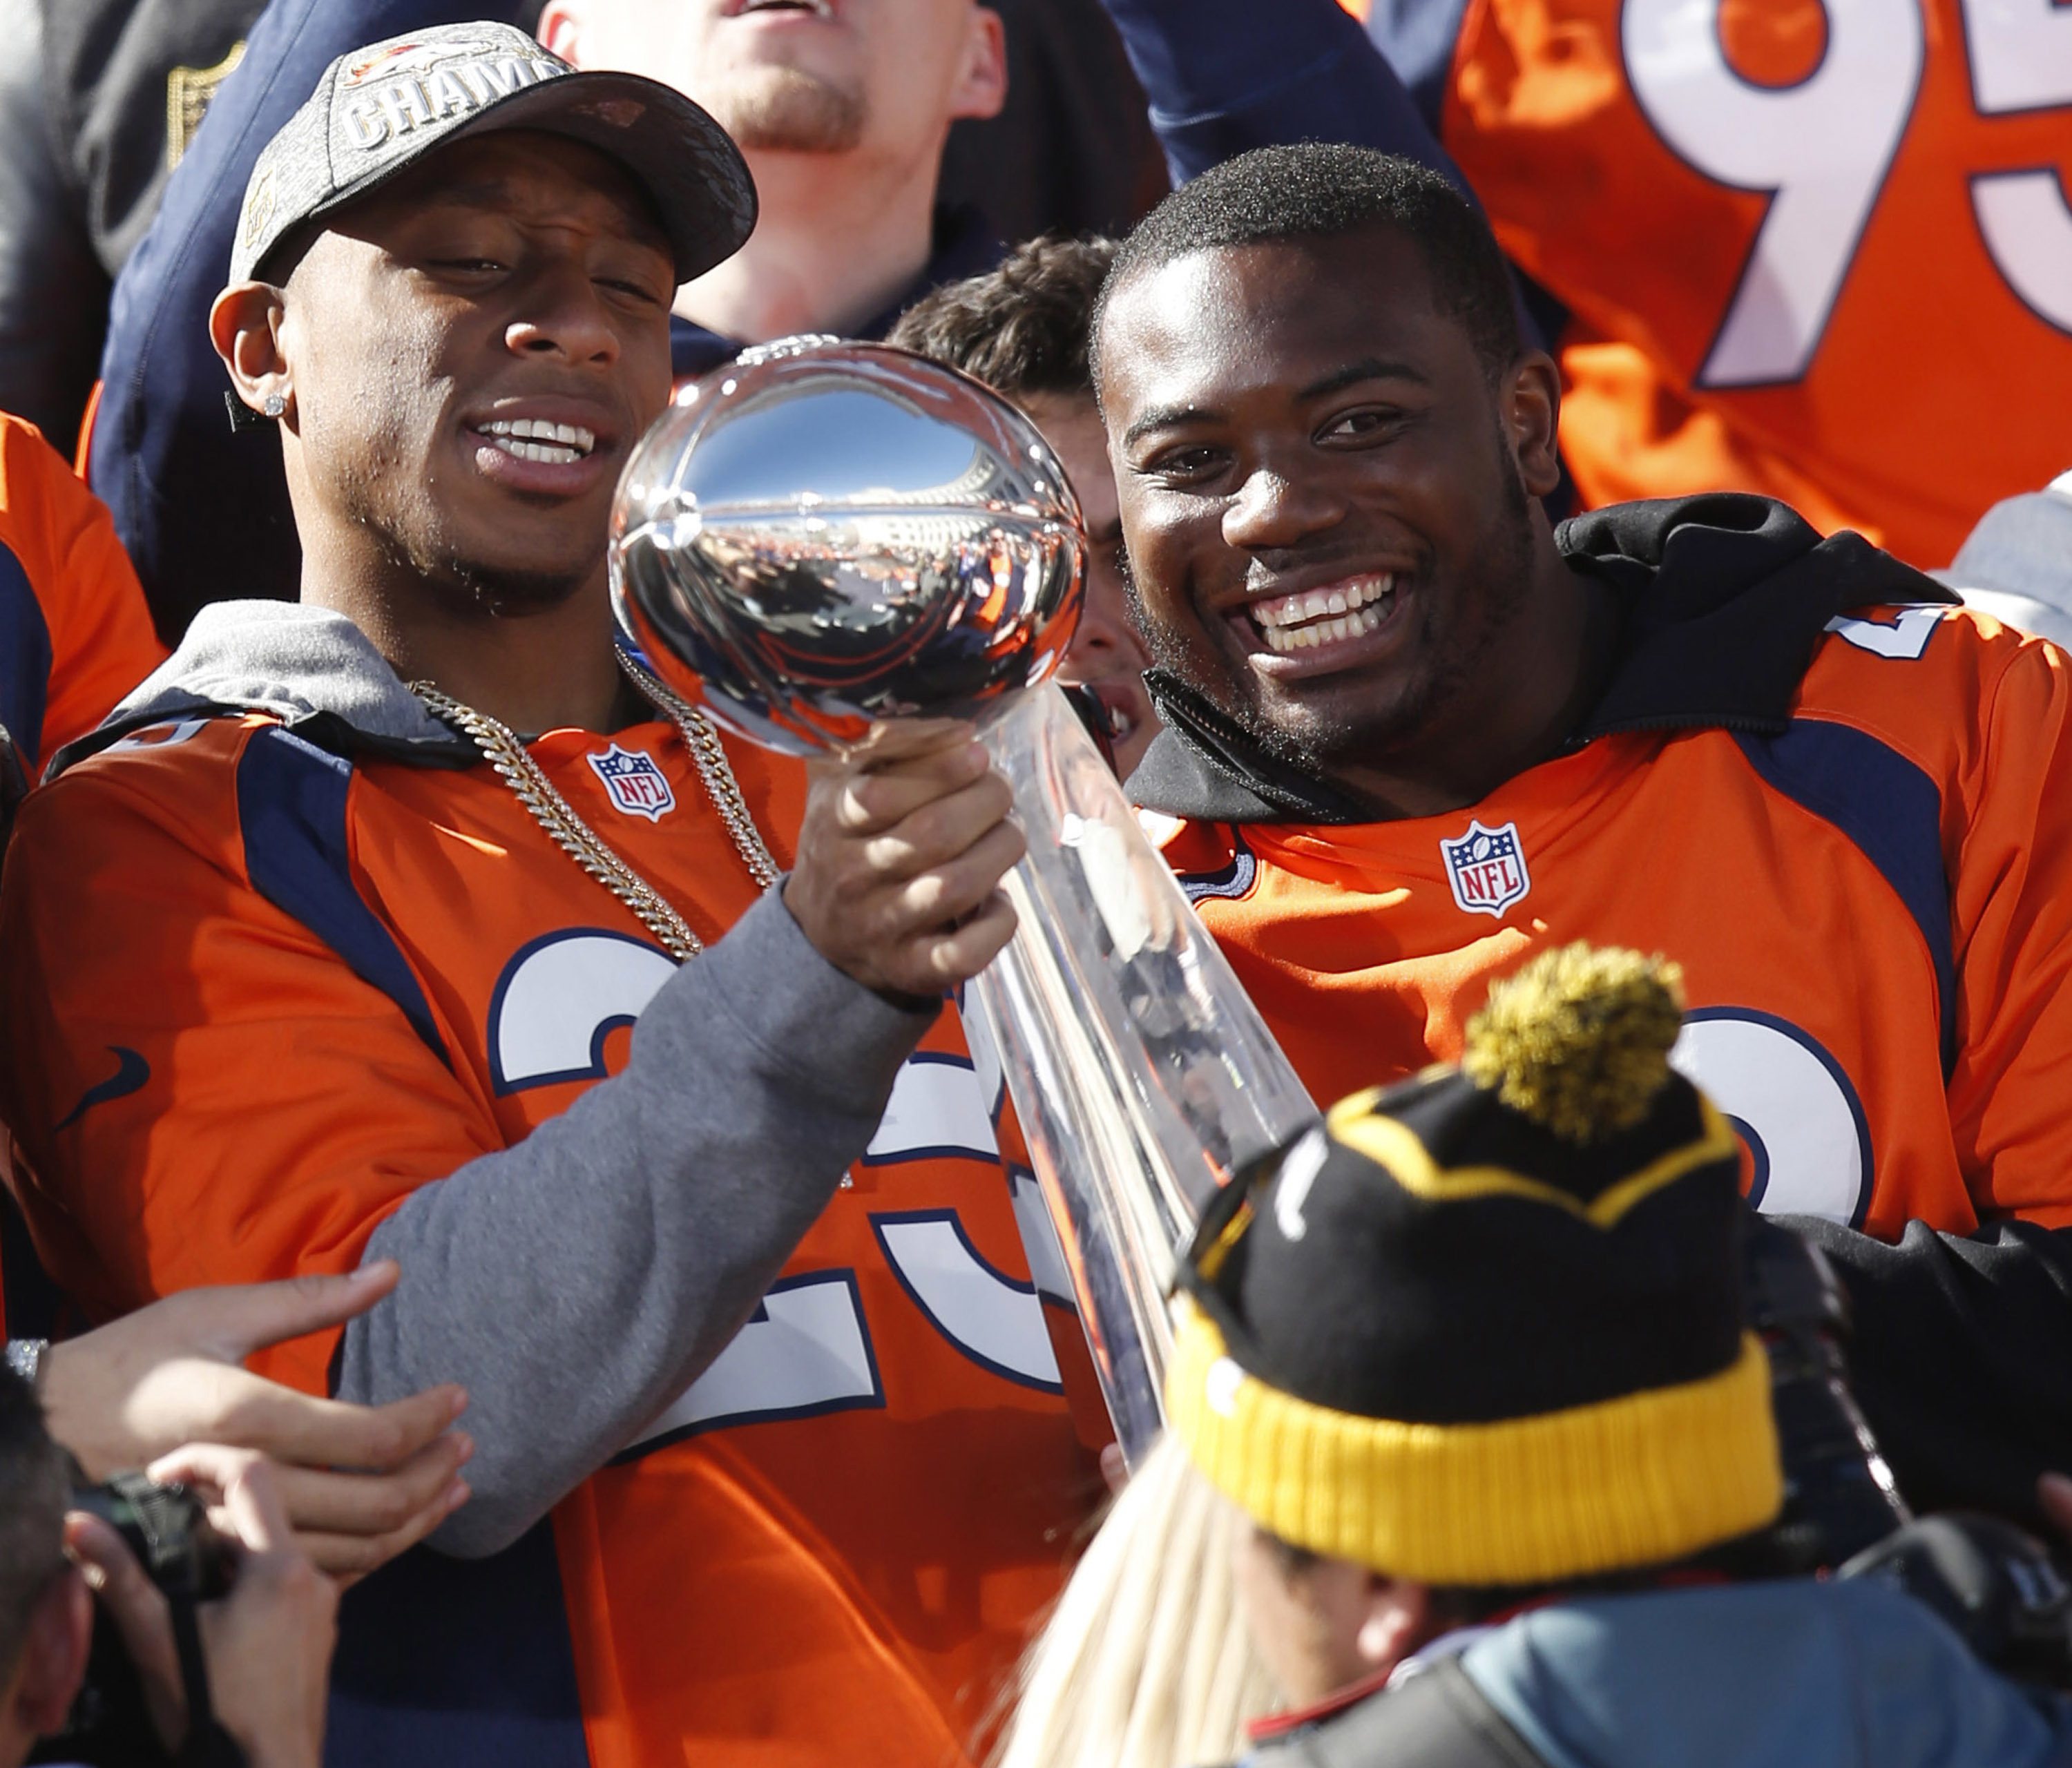 Denver Broncos cornerback Chris Harris, left, holds the Lombardi Trophy as running back C.J. Anderson looks on at a rally following a parade through downtown Tuesday, Feb. 9, 2016 in Denver. The Broncos will keep Anderson on the roster after matching Miami's four-year, $18-million offer to the running back who scored the Broncos' only offensive touchdown in Denver's victory over Carolina in Super Bowl 50.